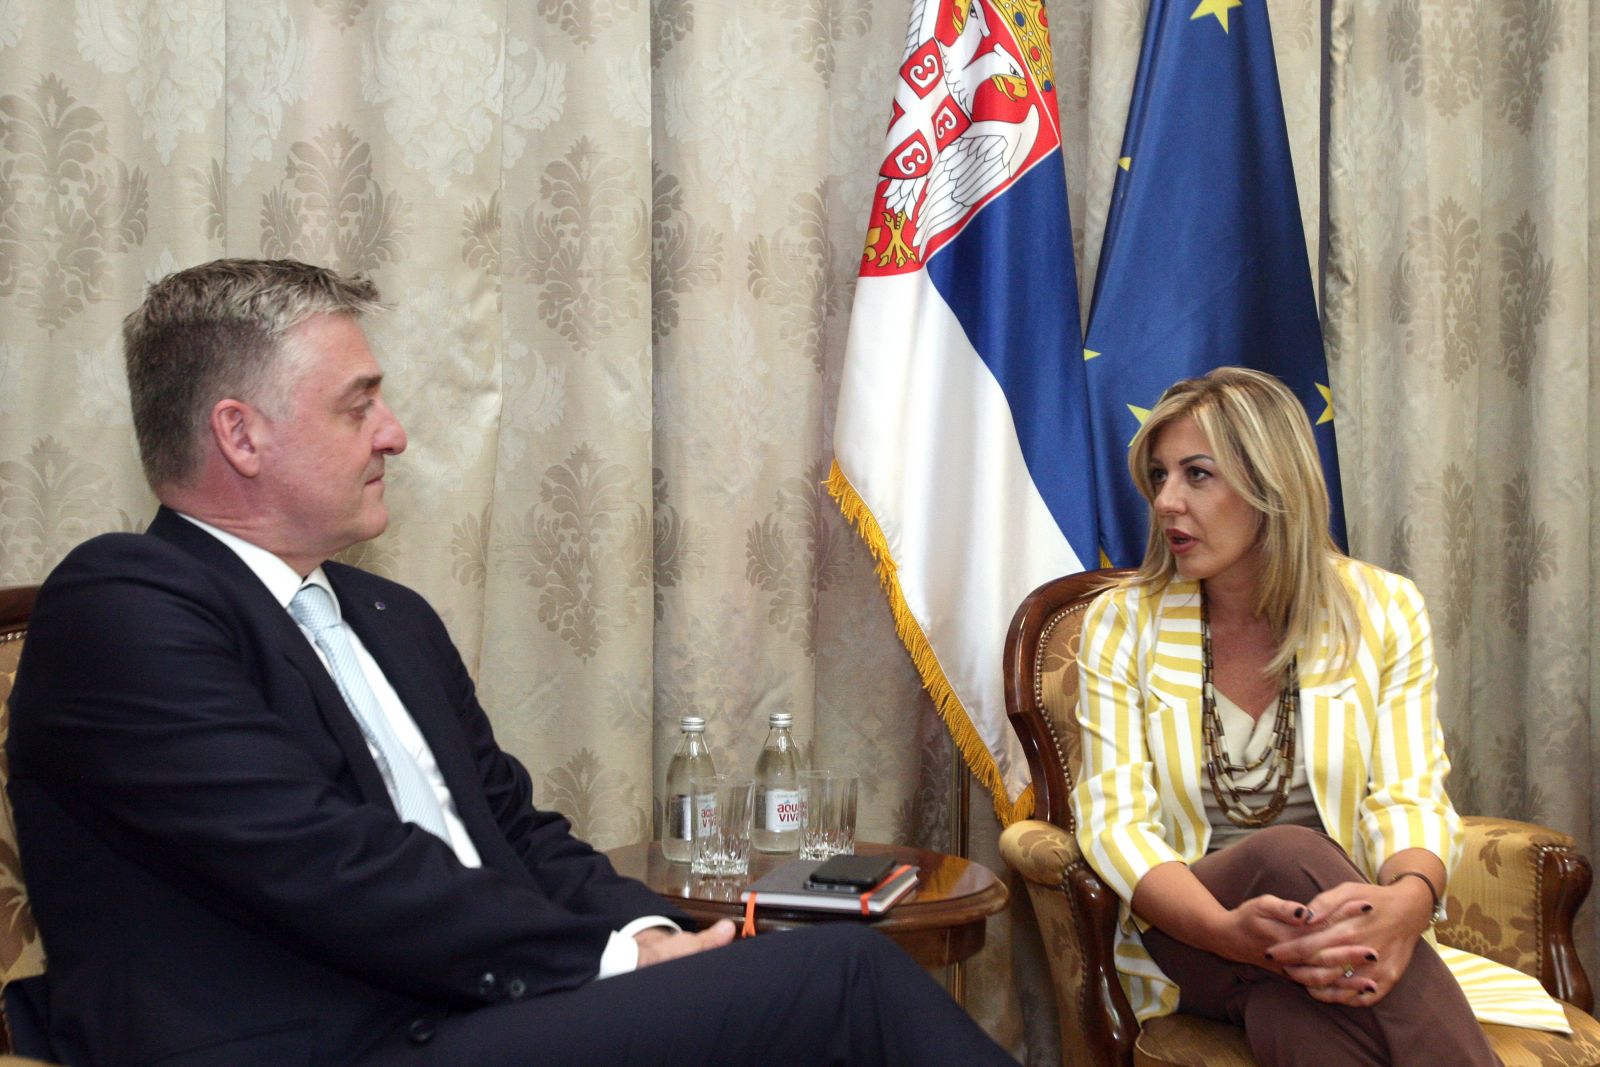 J. Joksimović and Flessenkemper: Council of Europe's expert recommendations important to Serbia